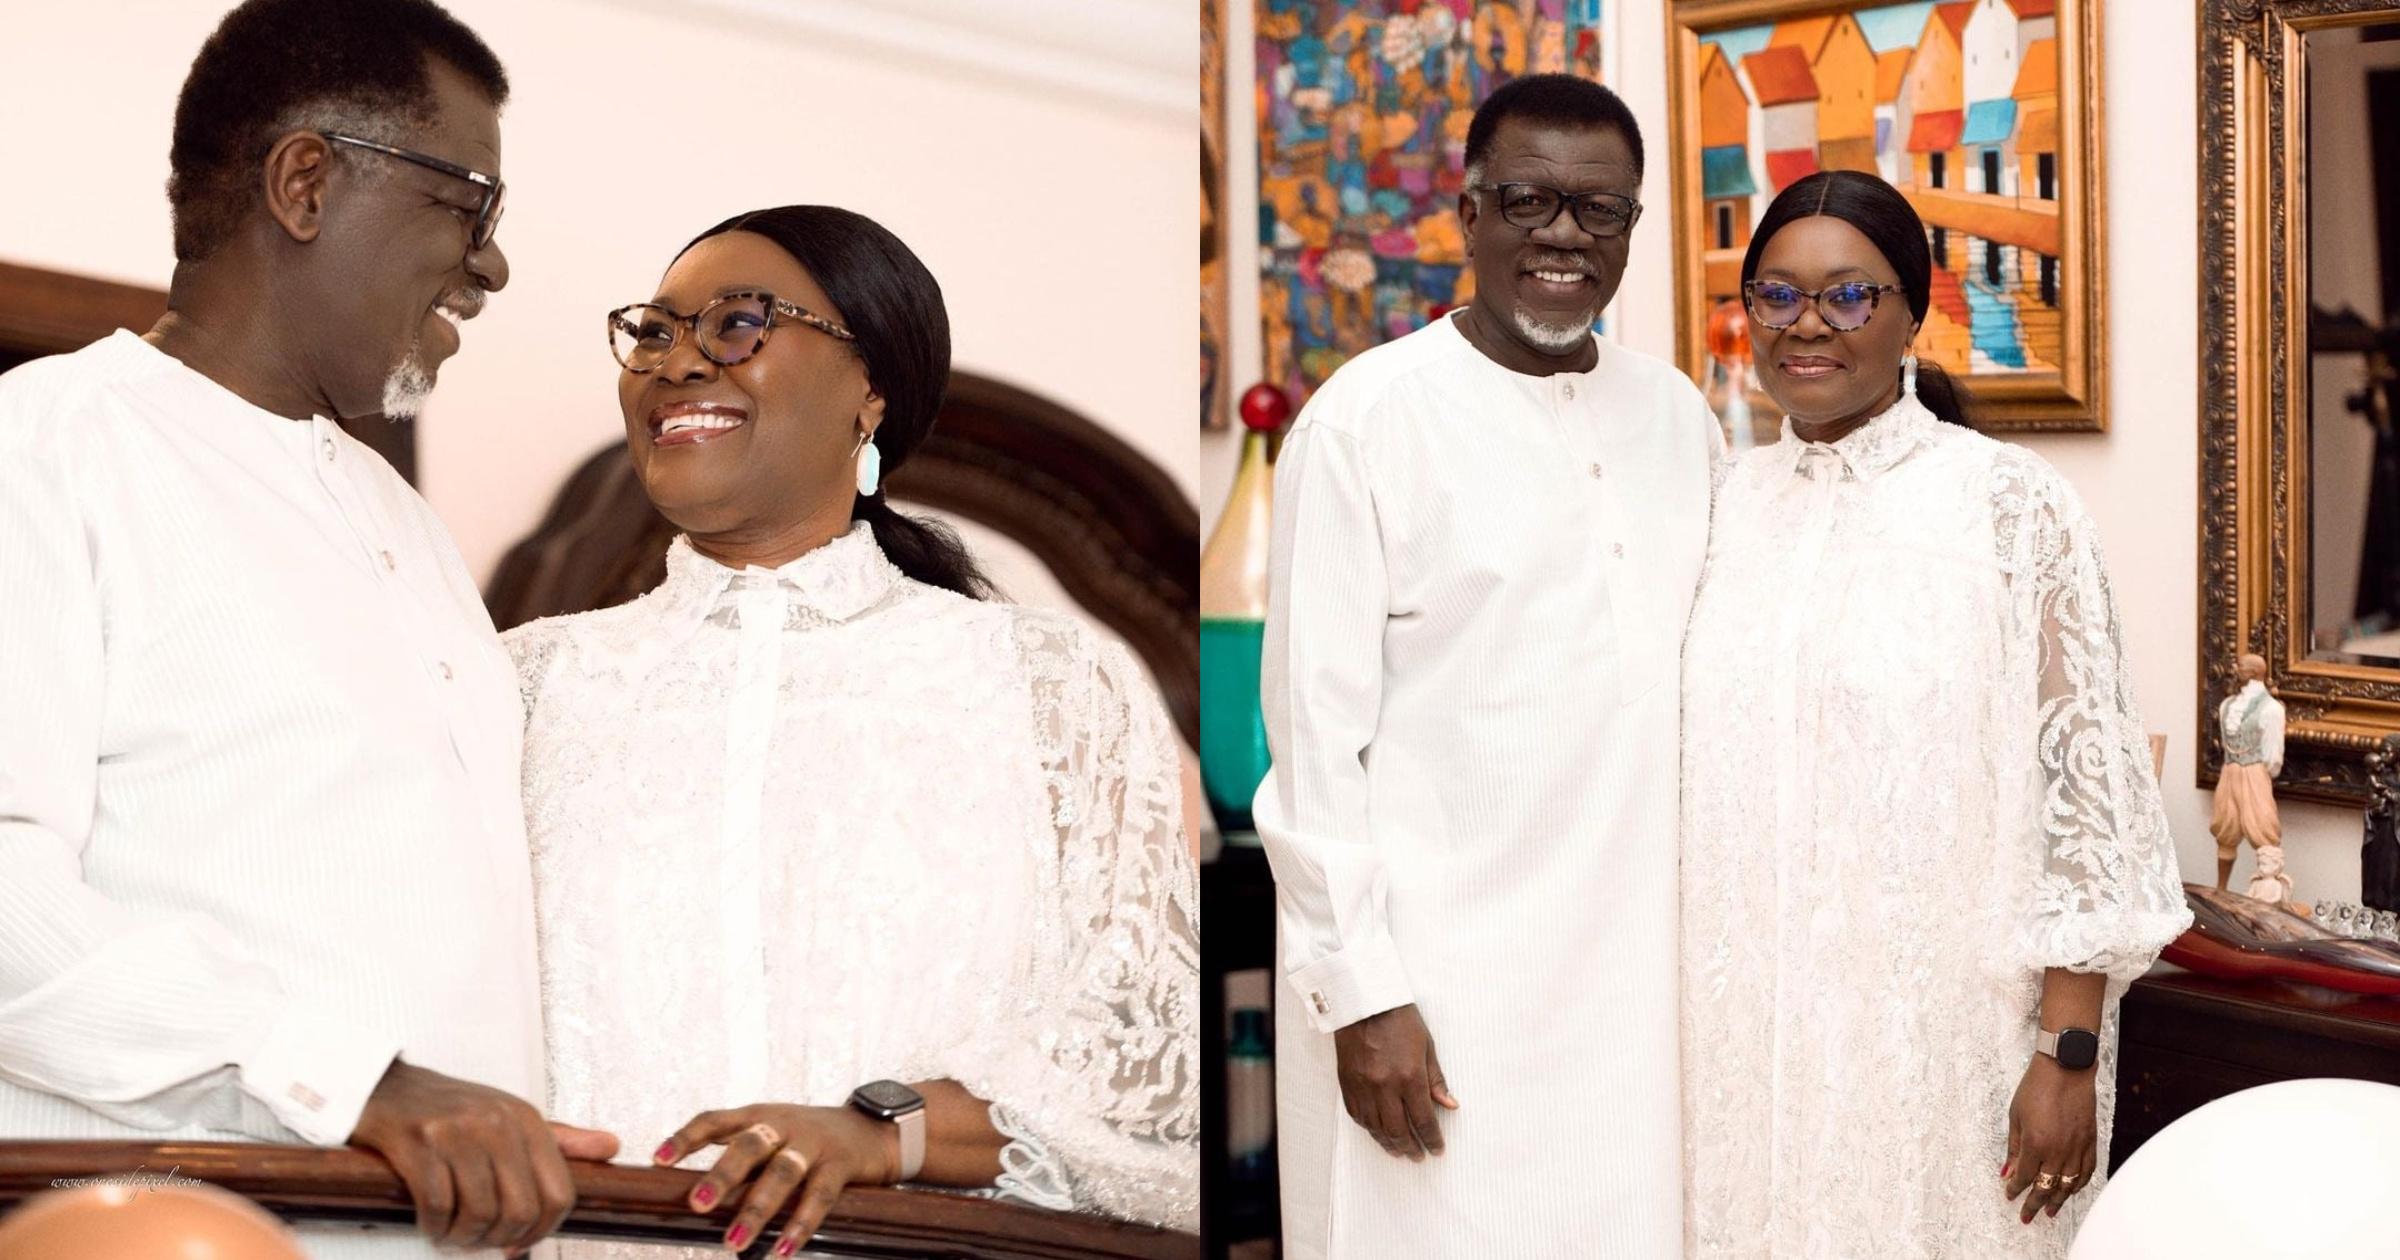 Loved-up photos of Mensa Otabil and his wife drop as they celebrate 35th wedding anniversary